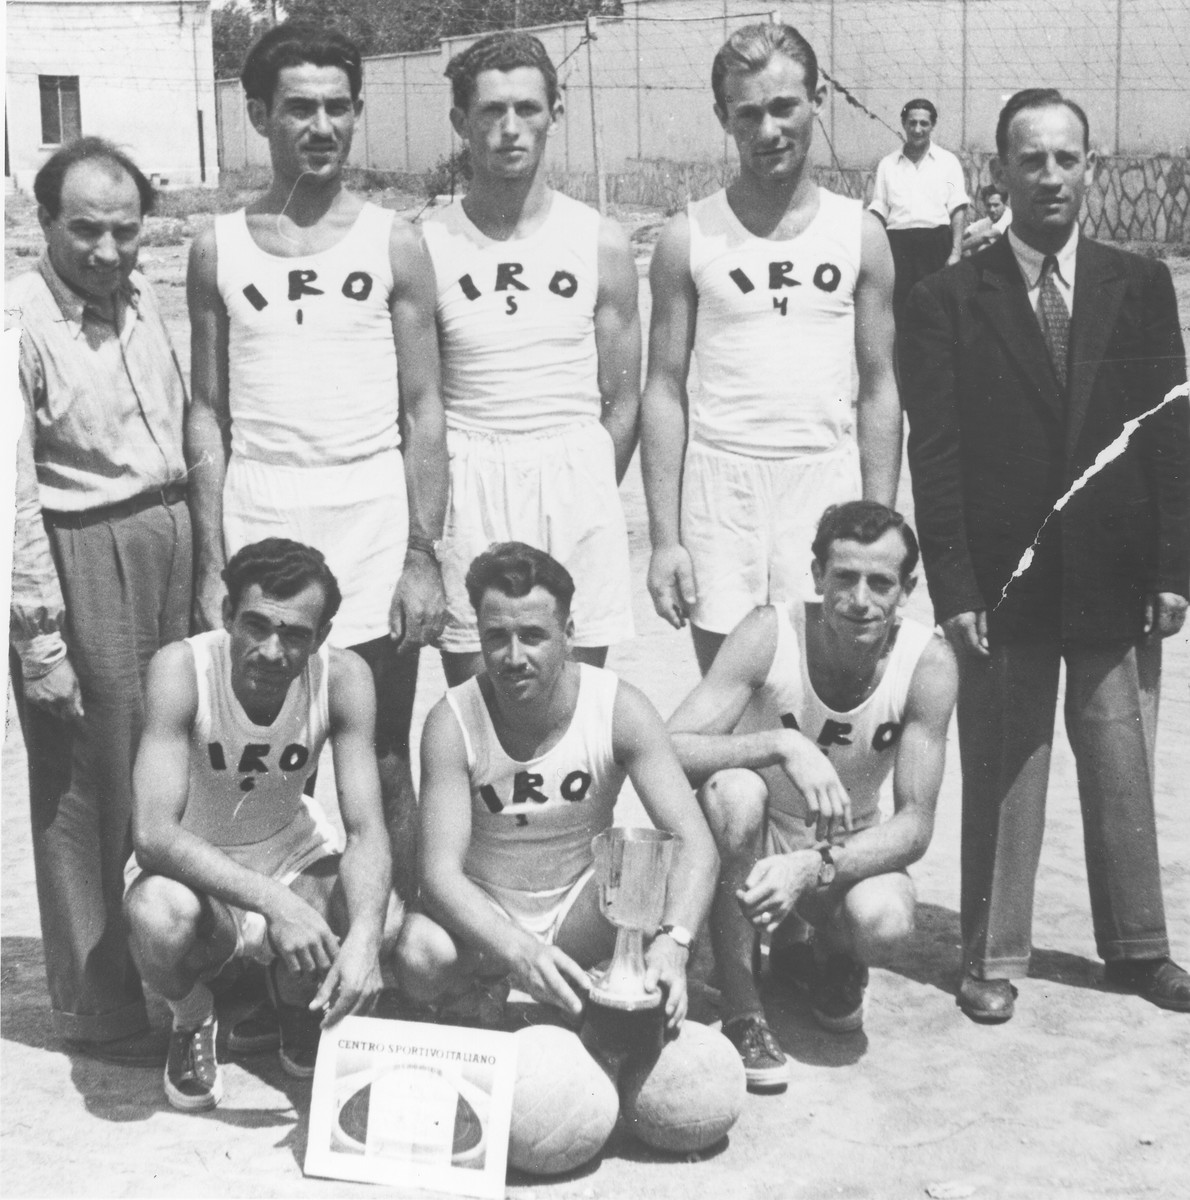 Members of the IRO (International Refugee Organization) volleyball team in the Trani displaced persons camp.

Among those pictured is Ignac Bercovicz (standing third from the left).